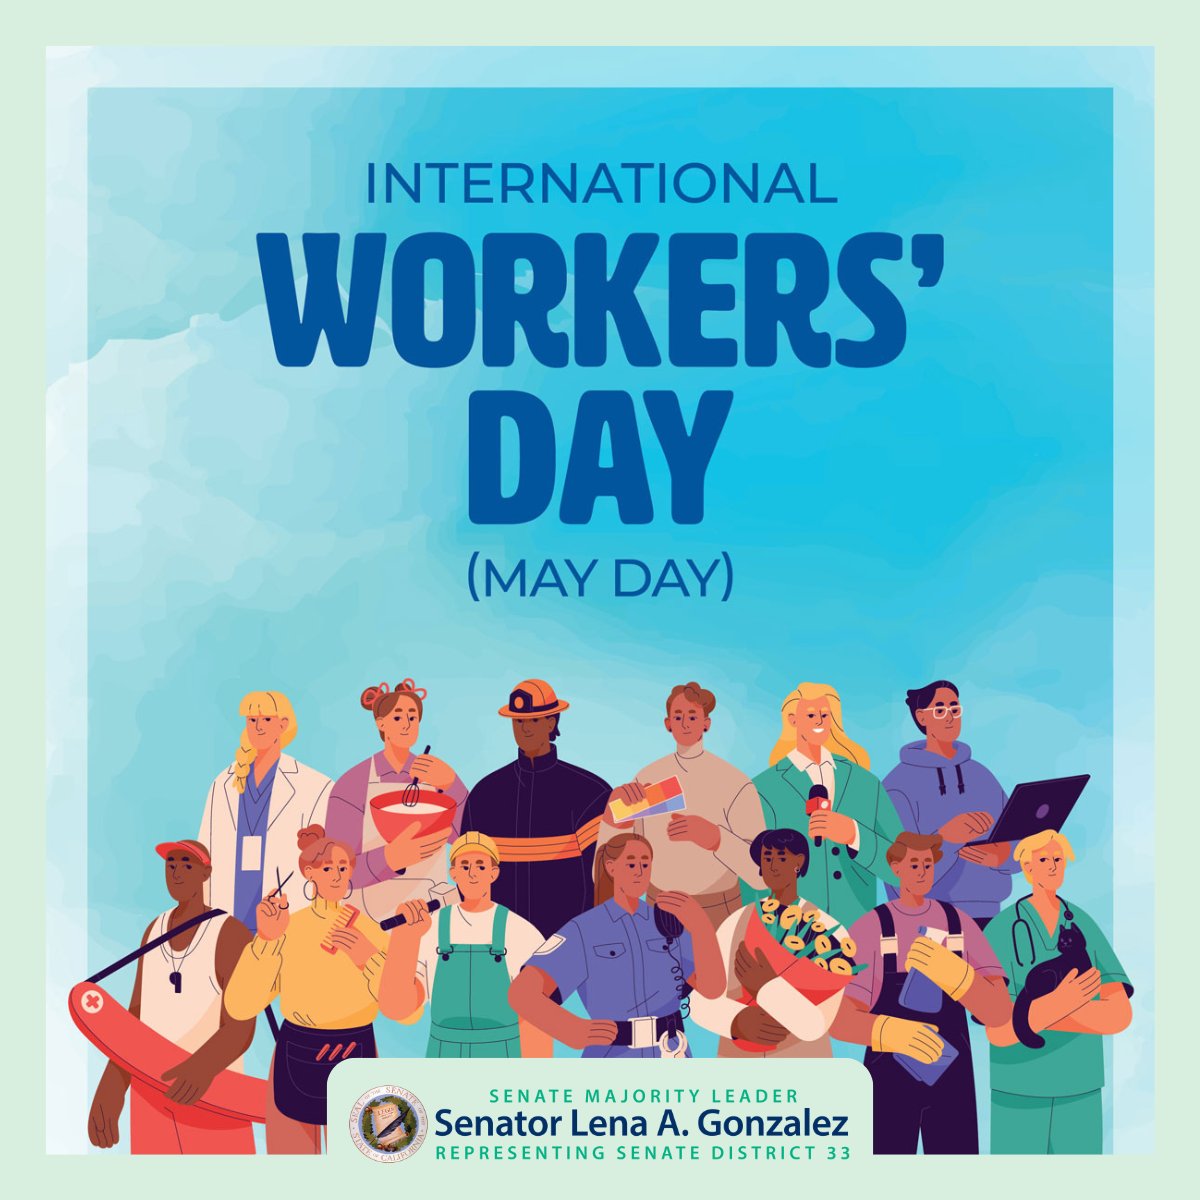 Happy #MayDay/International Workers' Day! 🎉Every day, I'm honored to help fight for workers' rights in CA through legislation such as SB 616 which increased paid sick days from 3 to 5. Together, we can build a brighter future for workers. Learn more: bit.ly/SB616Facts